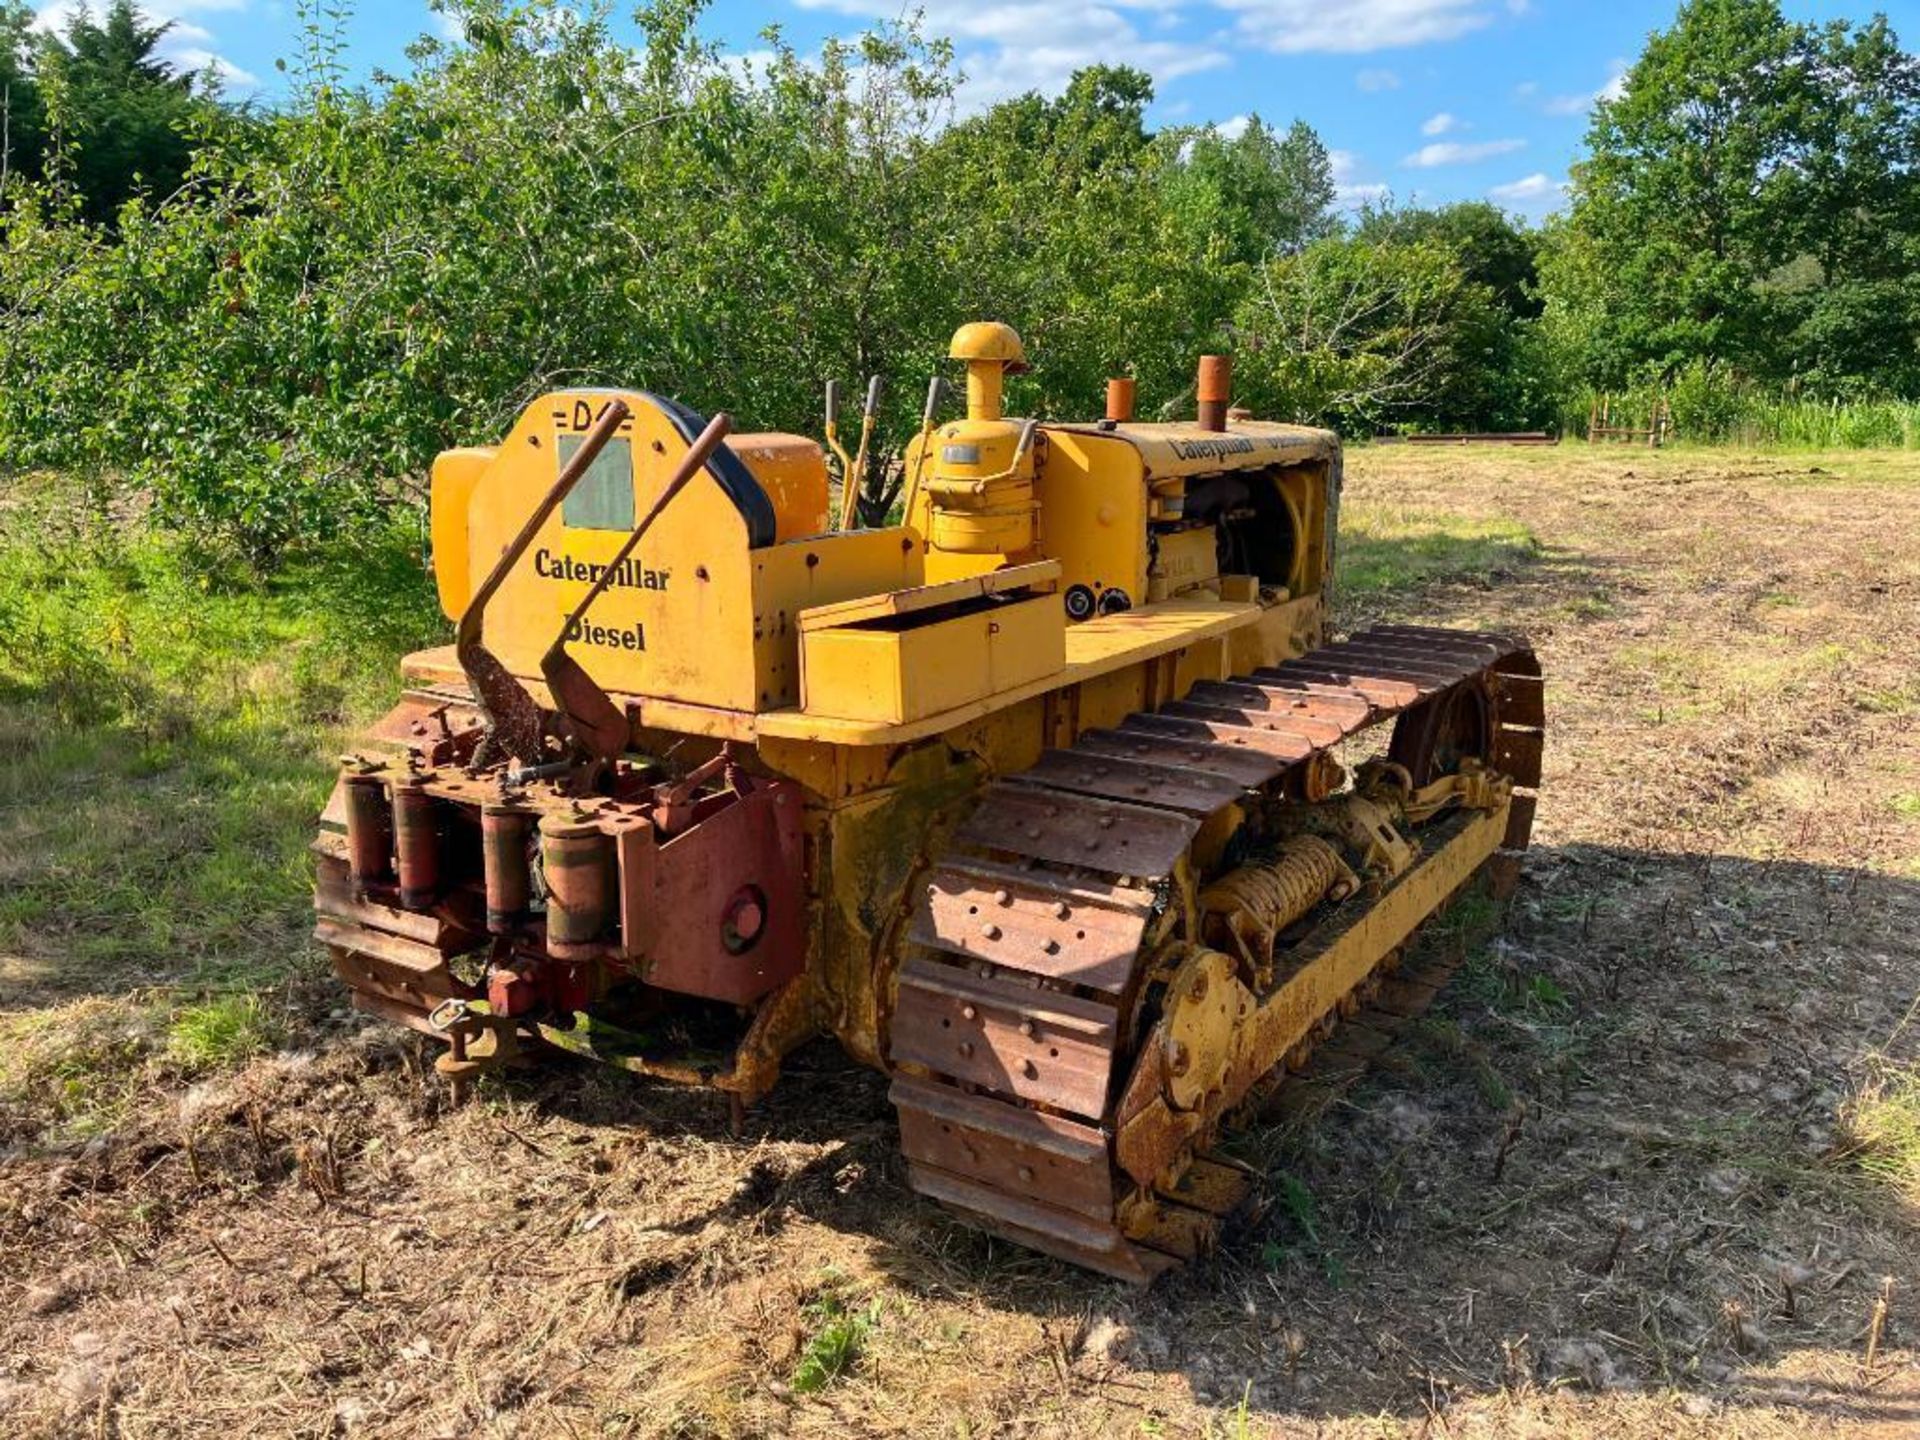 1949 Caterpillar D4 wide gauge metal tracked crawler with 16" tracks , swinging drawbar and rear cab - Image 4 of 18